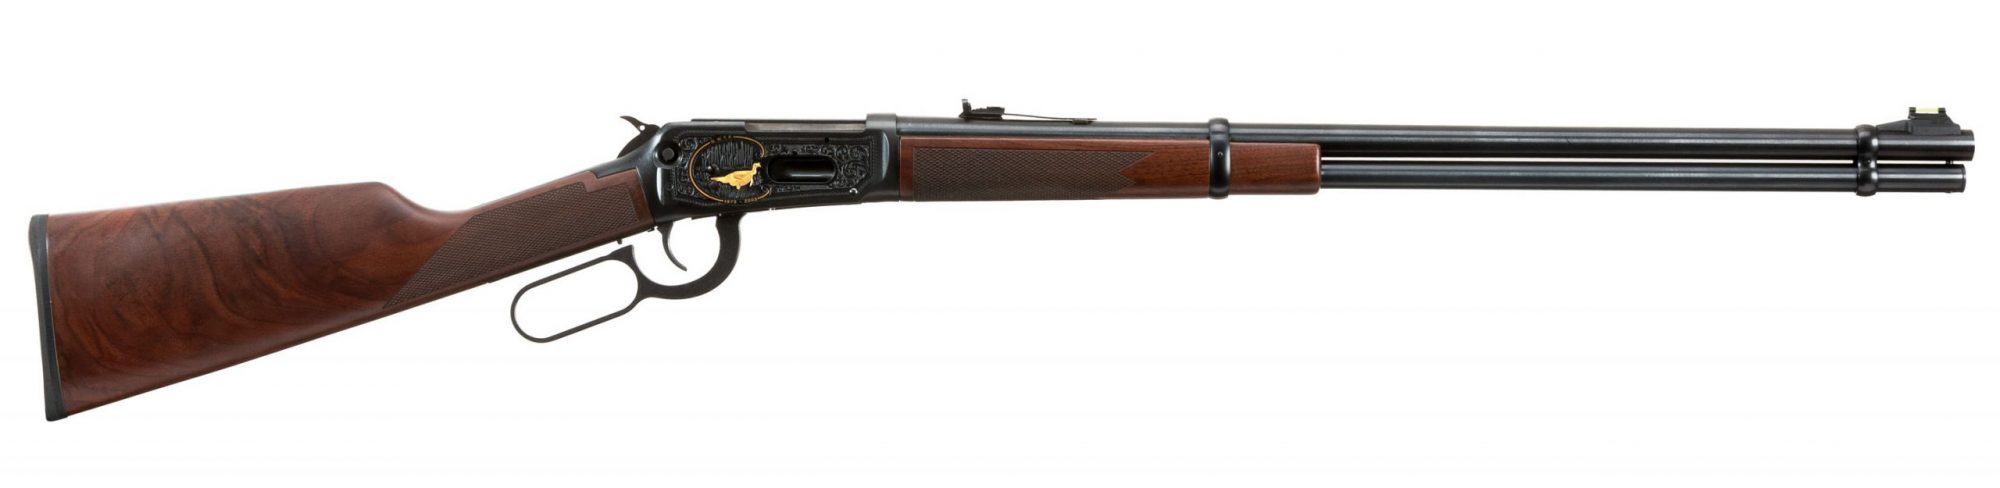 Photo of a NWTF Winchester Model 9410, for sale by Turnbull Restoration of Bloomfield, NY